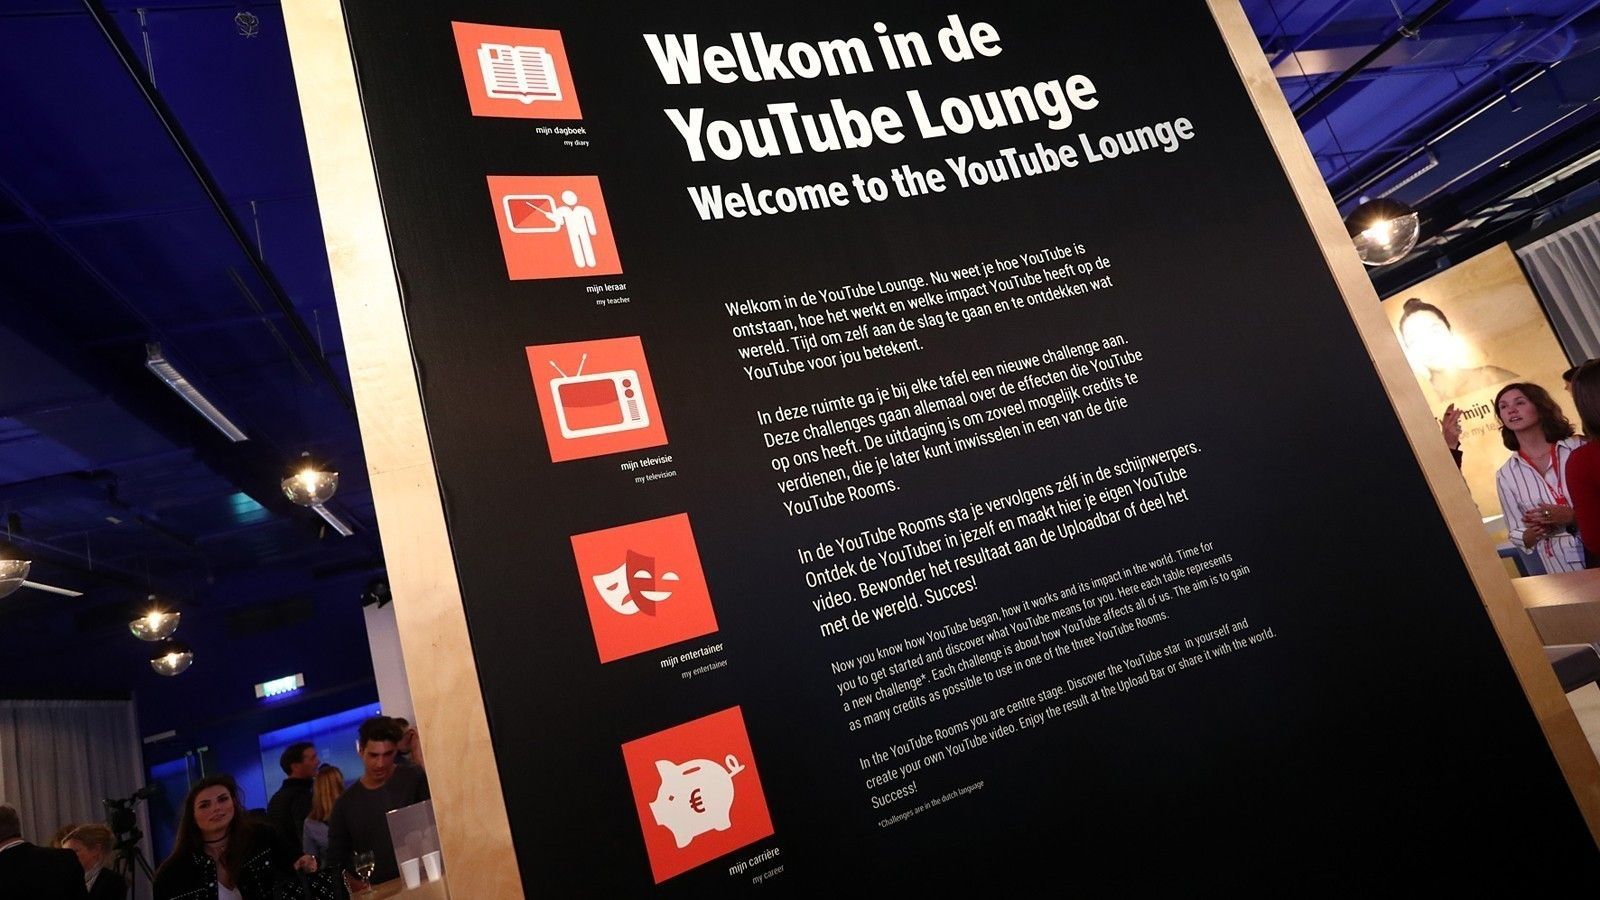 Let‘s YouTube, world’s first exhibition about YouTube